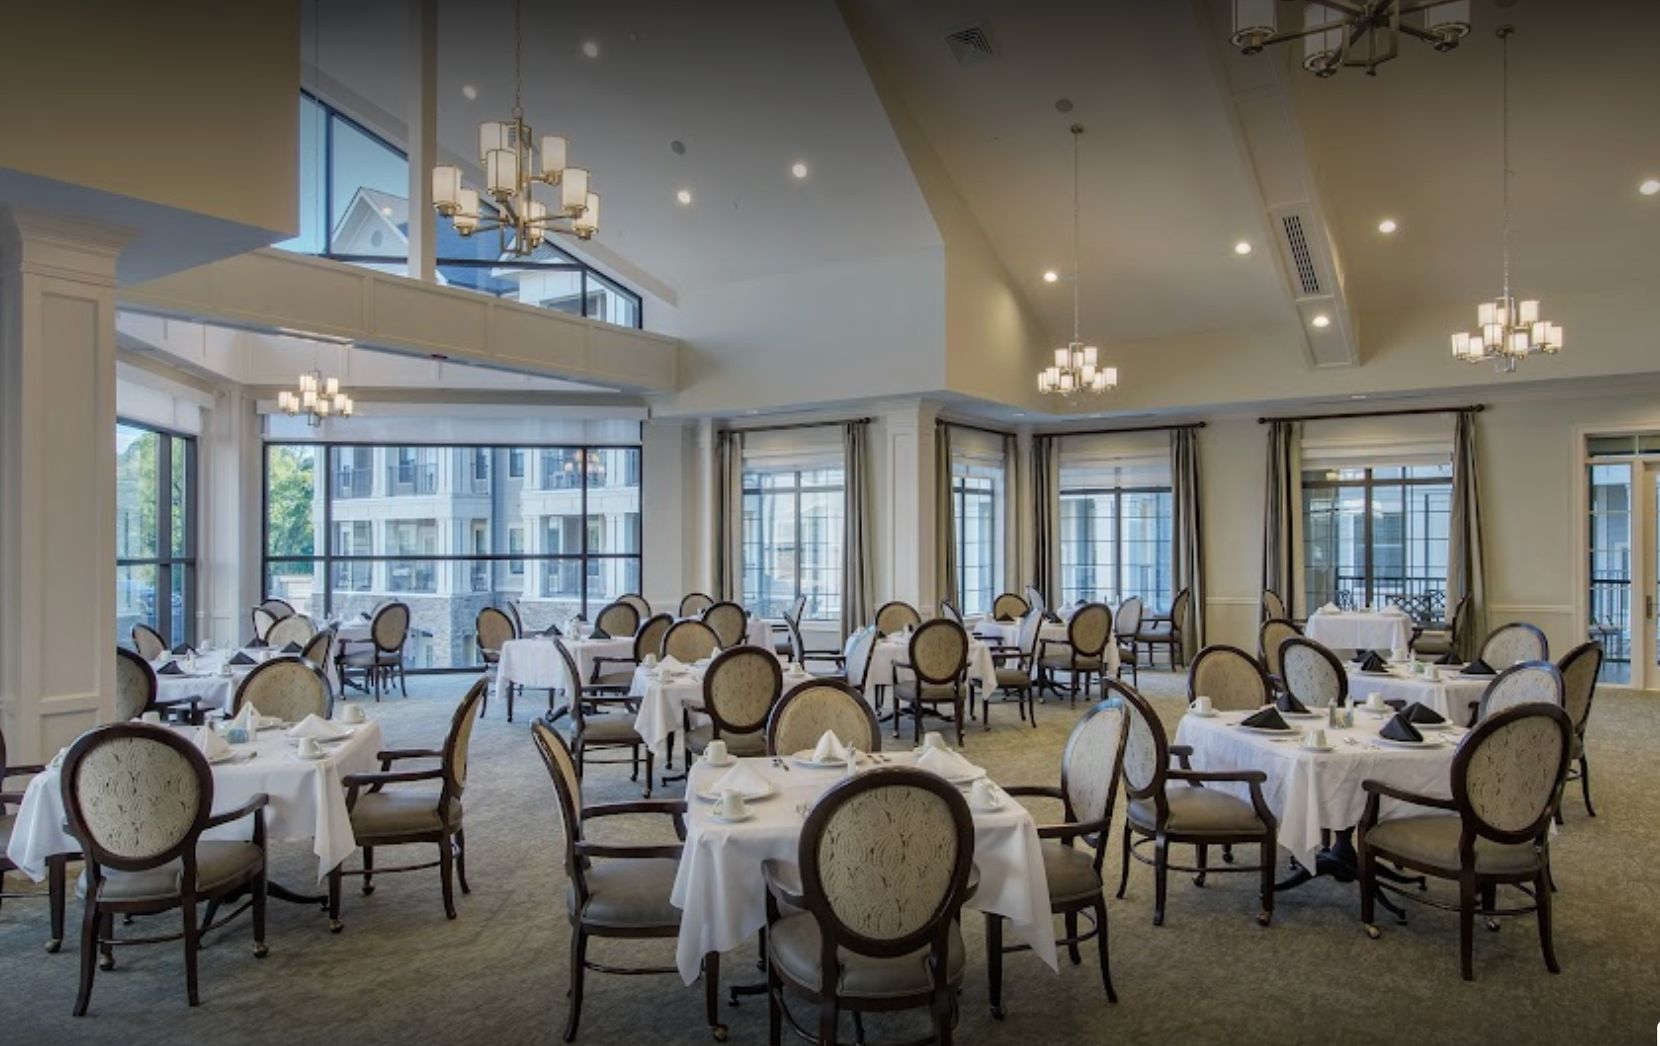 Somerby Franklin senior living community featuring elegant dining room and reception area.